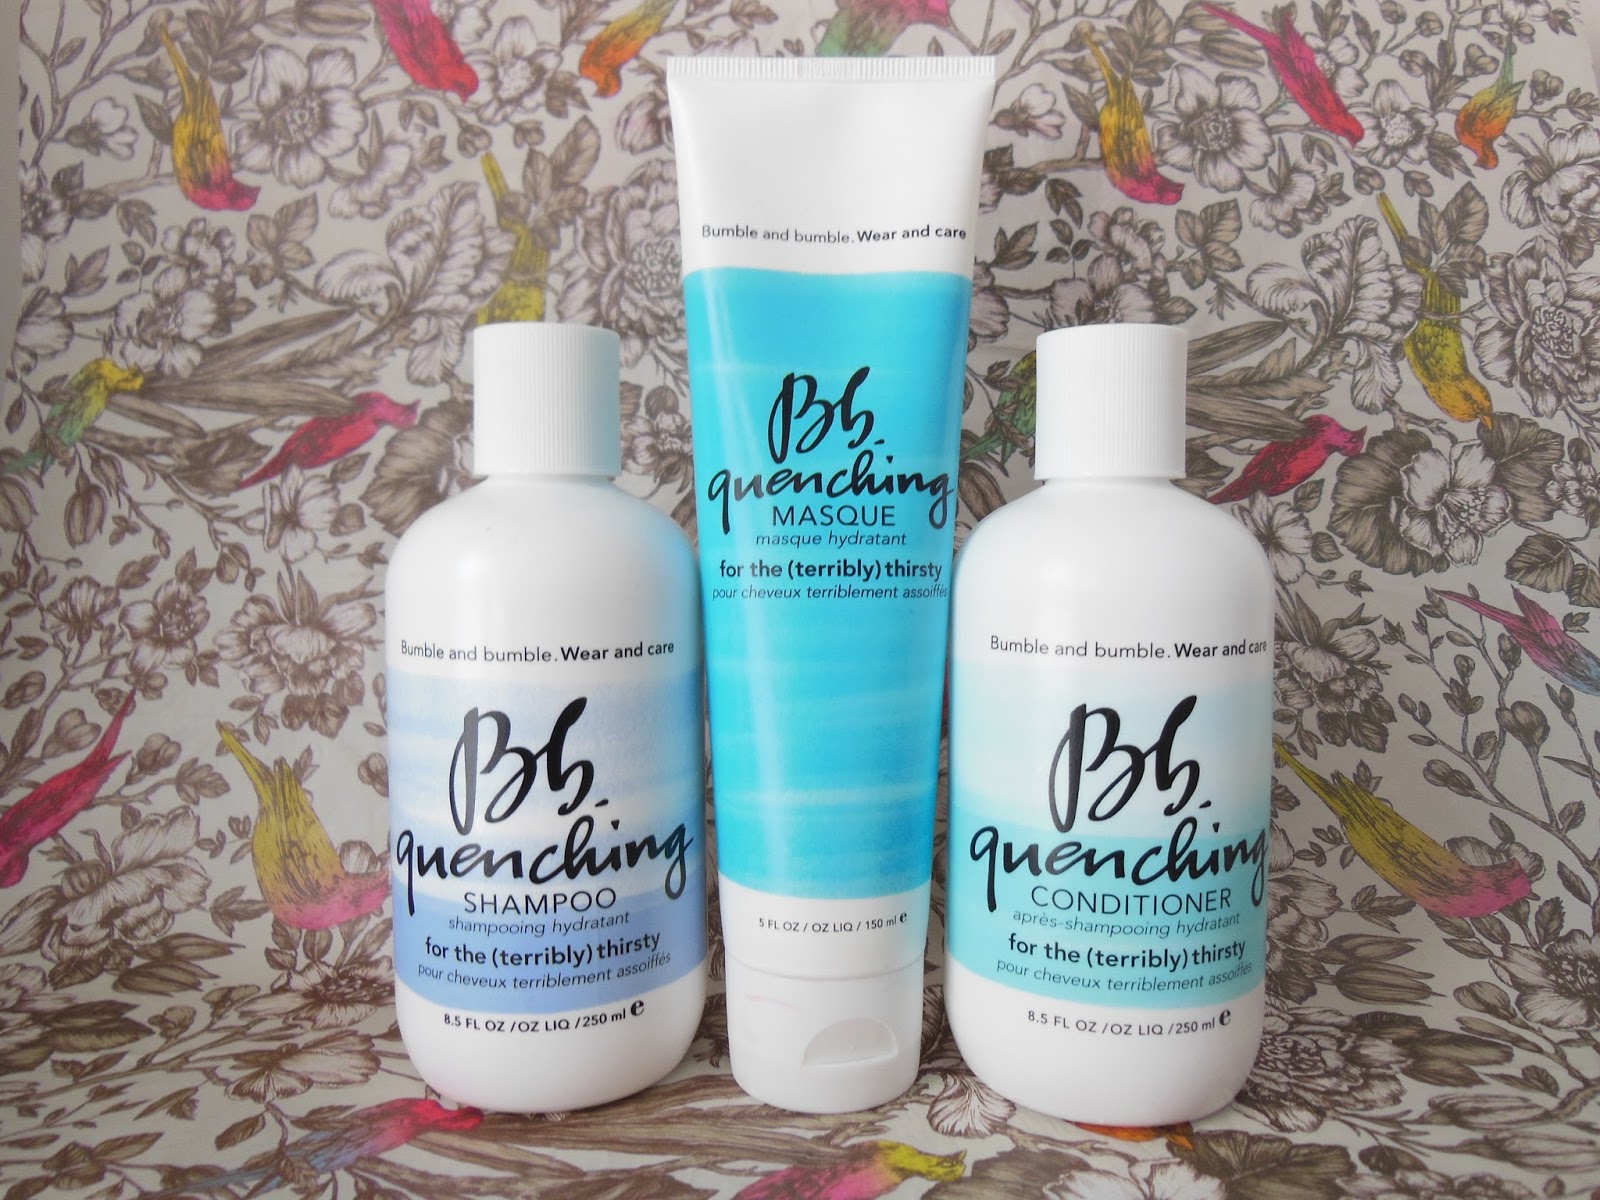 Bumble and Bumble Quenching hair care range